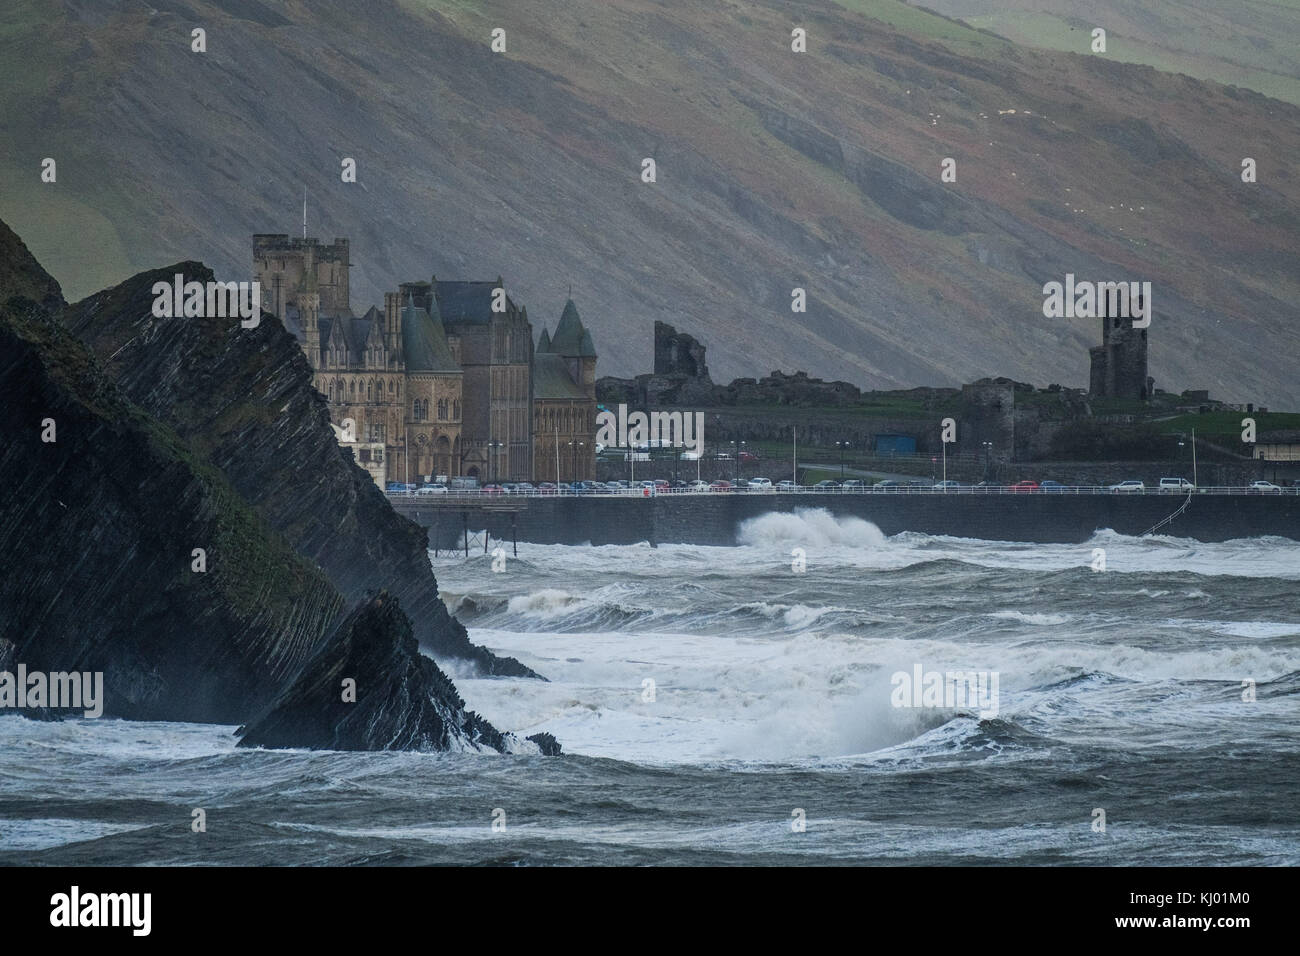 Aberystwyth Wales UK, Thursday 23 November 2017 UK Weather: High tides and very strong winds combine to bring waves crashing into the castle headland and university buildings on the promenade in Aberystwyth, on the Cardigan Bay coast of west wales. photo Credit: Keith Morris/Alamy Live News Stock Photo